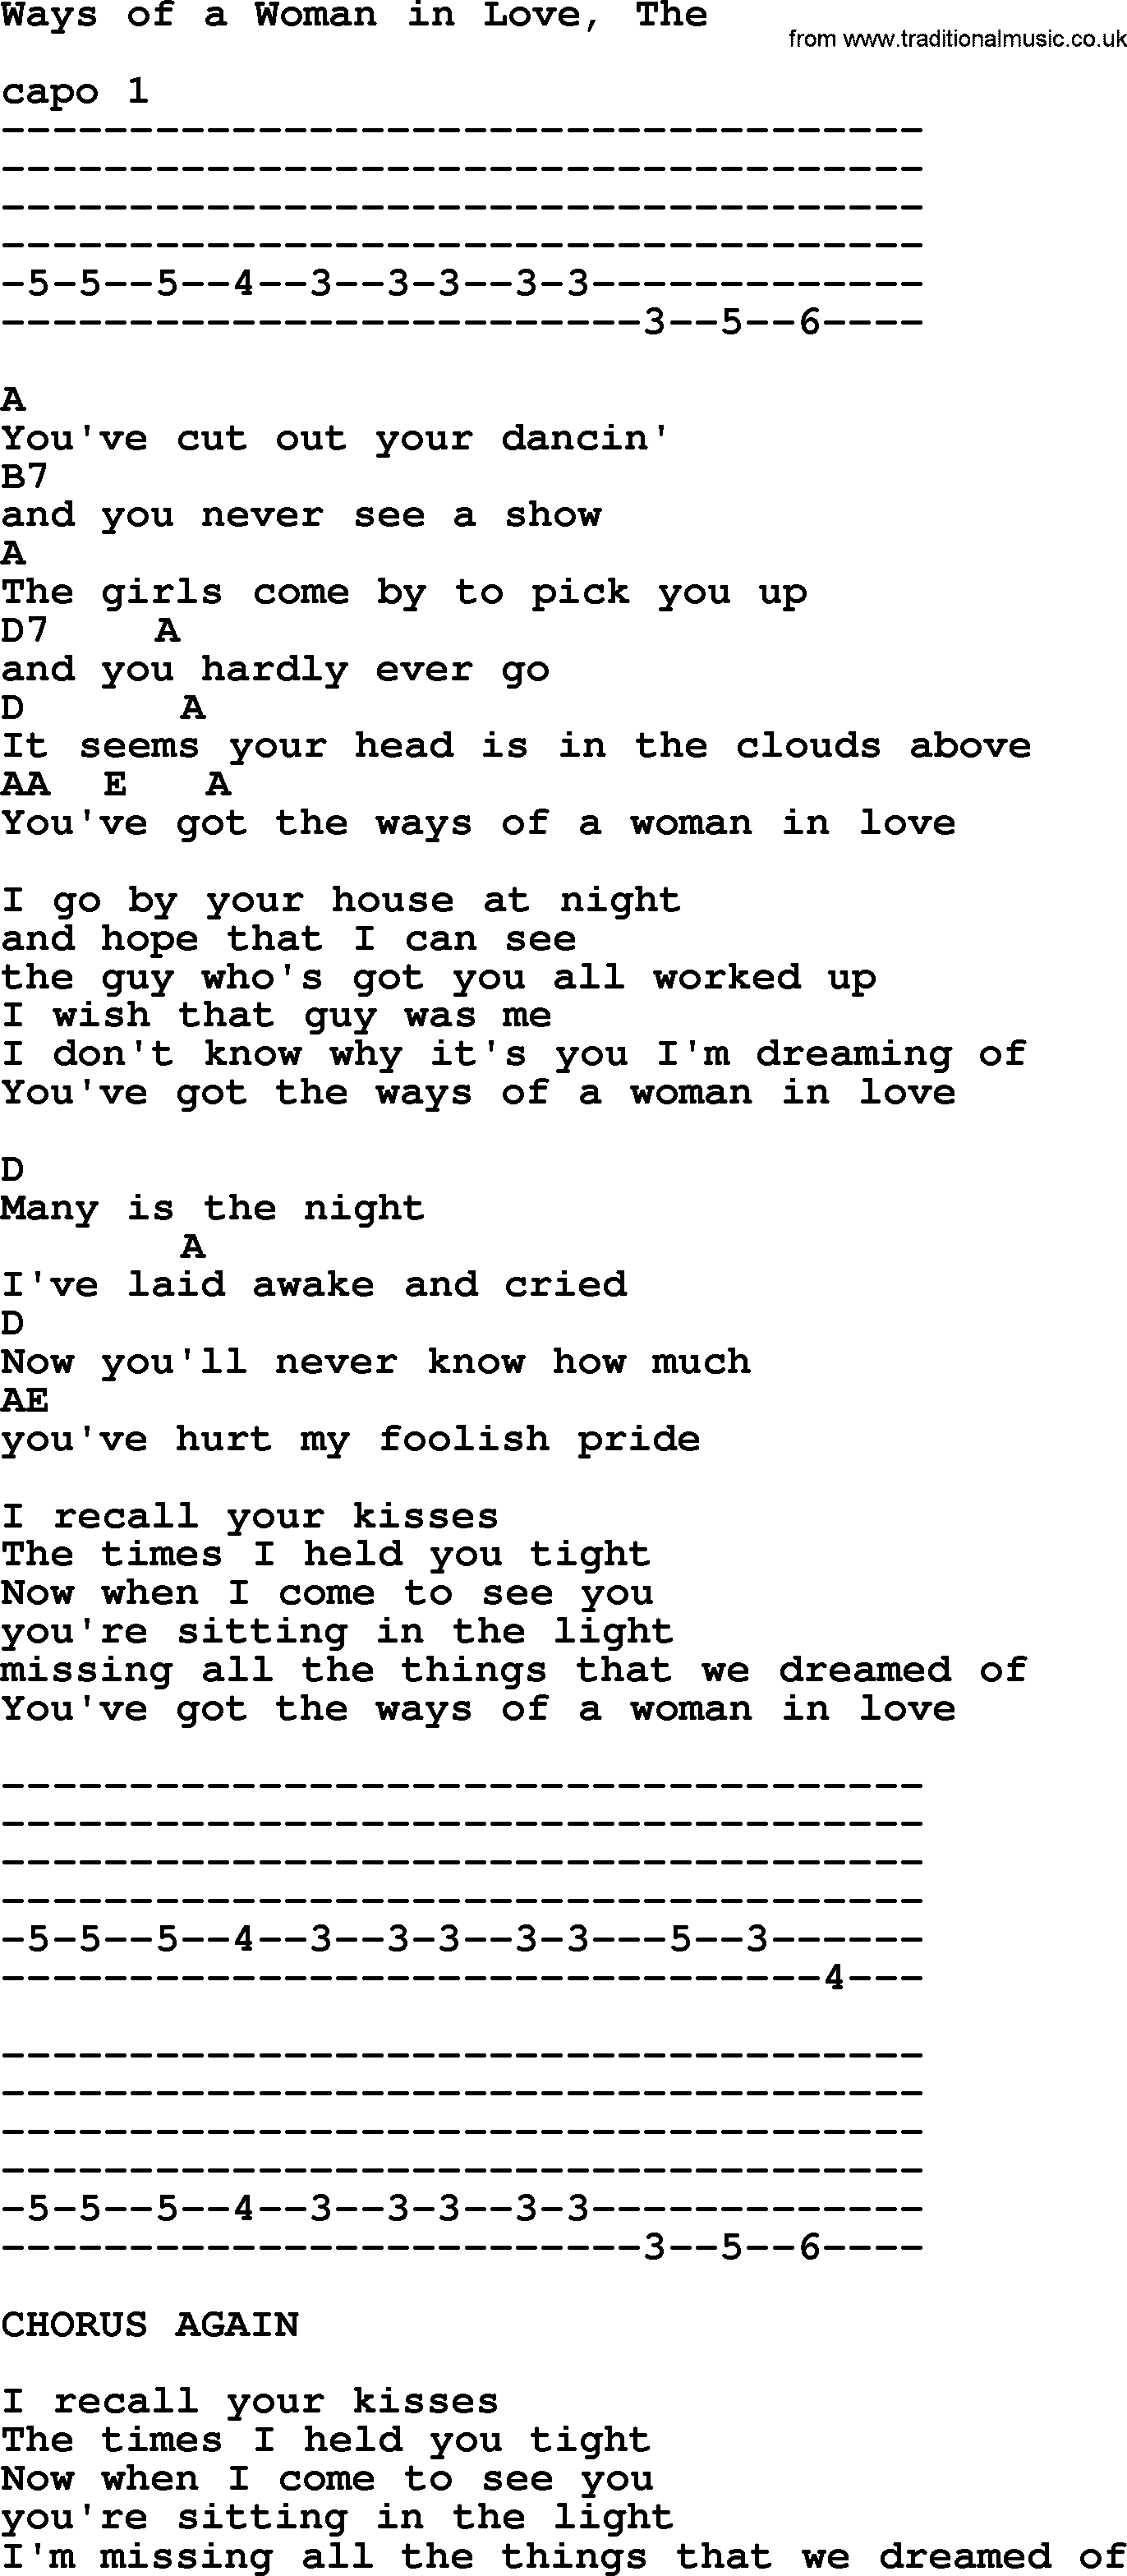 Johnny Cash song Ways Of A Woman In Love, The, lyrics and chords